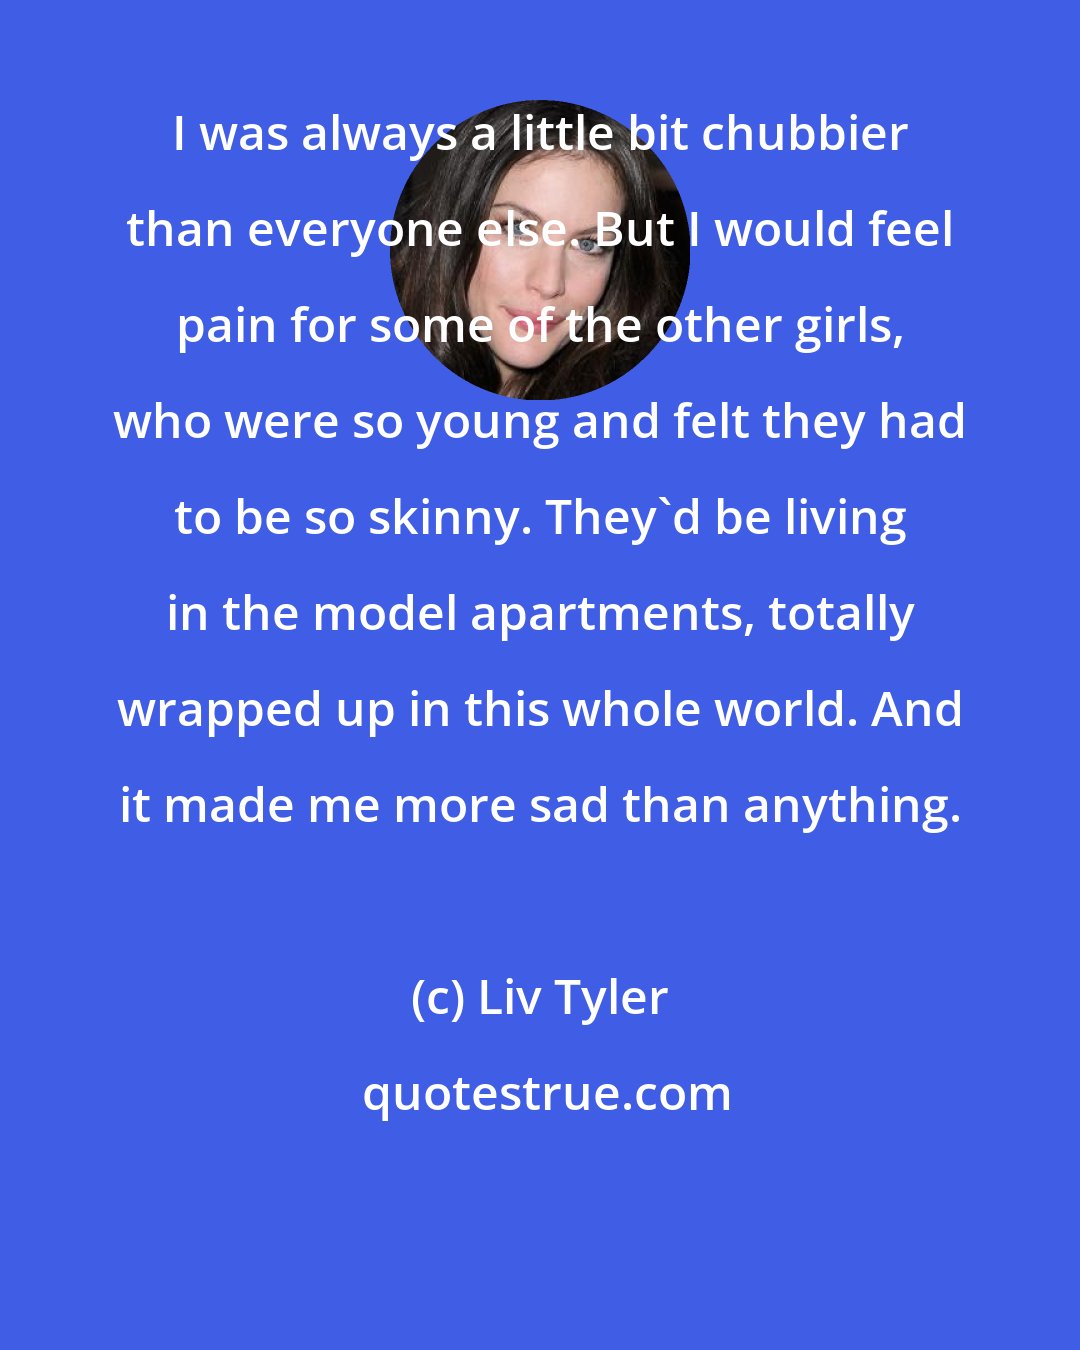 Liv Tyler: I was always a little bit chubbier than everyone else. But I would feel pain for some of the other girls, who were so young and felt they had to be so skinny. They'd be living in the model apartments, totally wrapped up in this whole world. And it made me more sad than anything.